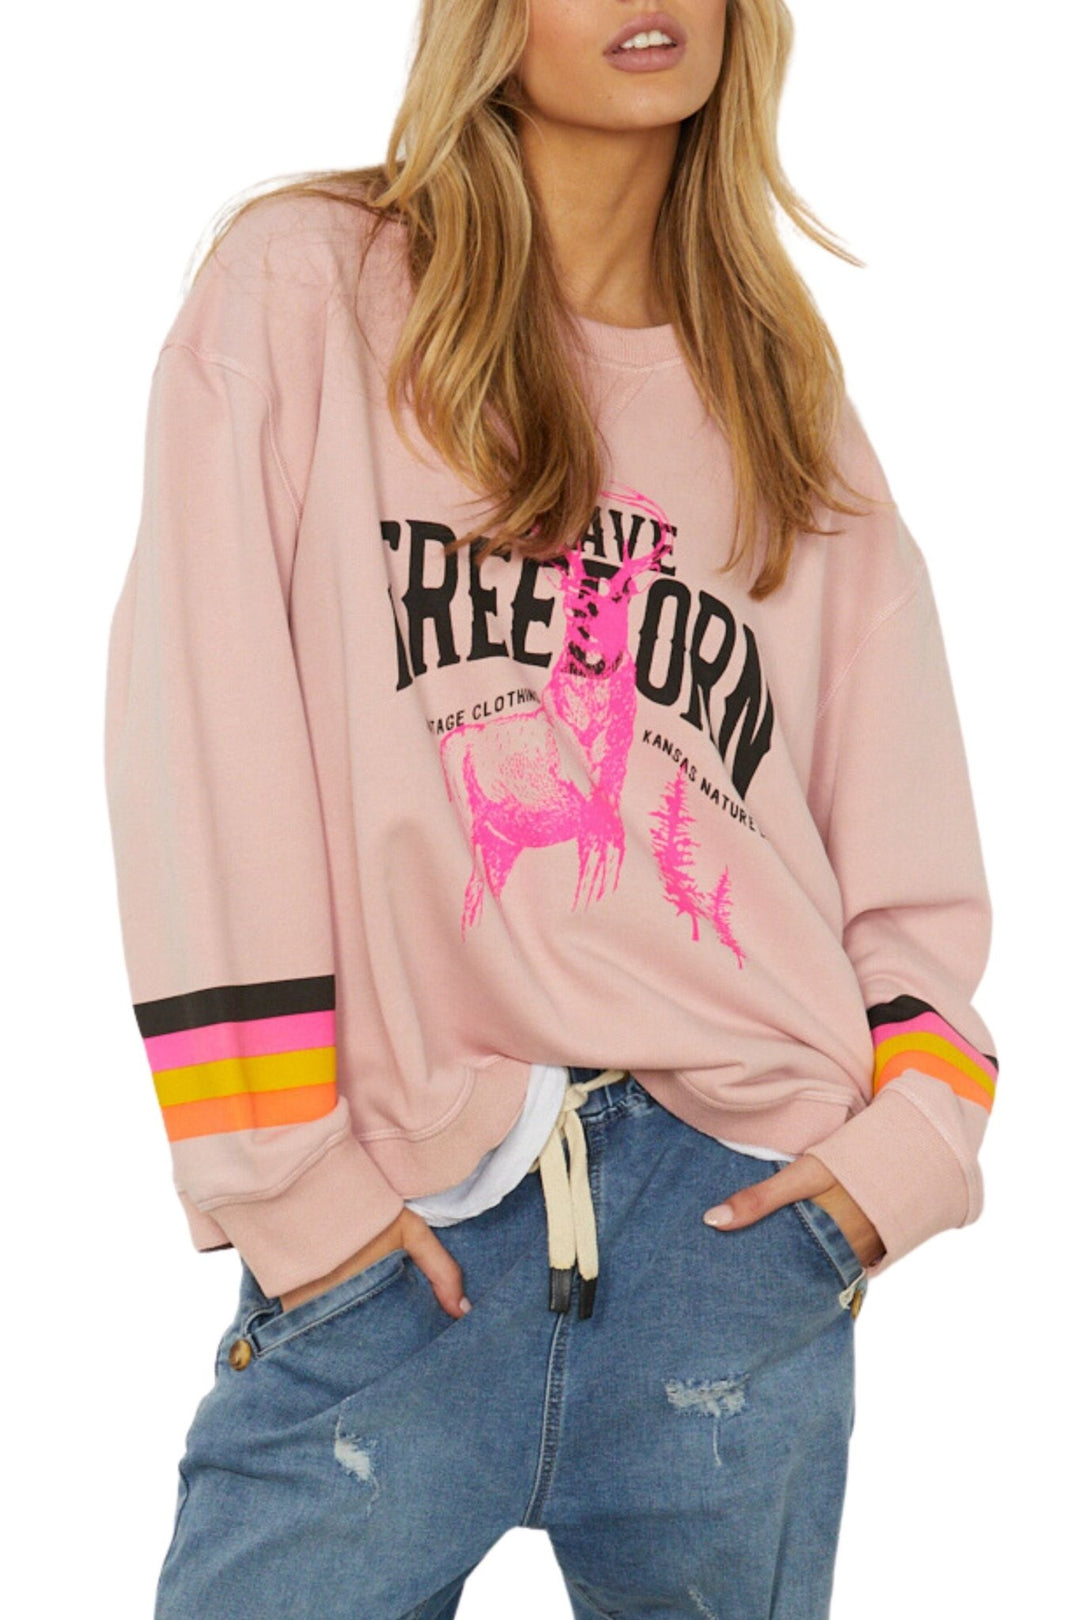 Brave Freedom sweater in Musk - Since I Found You